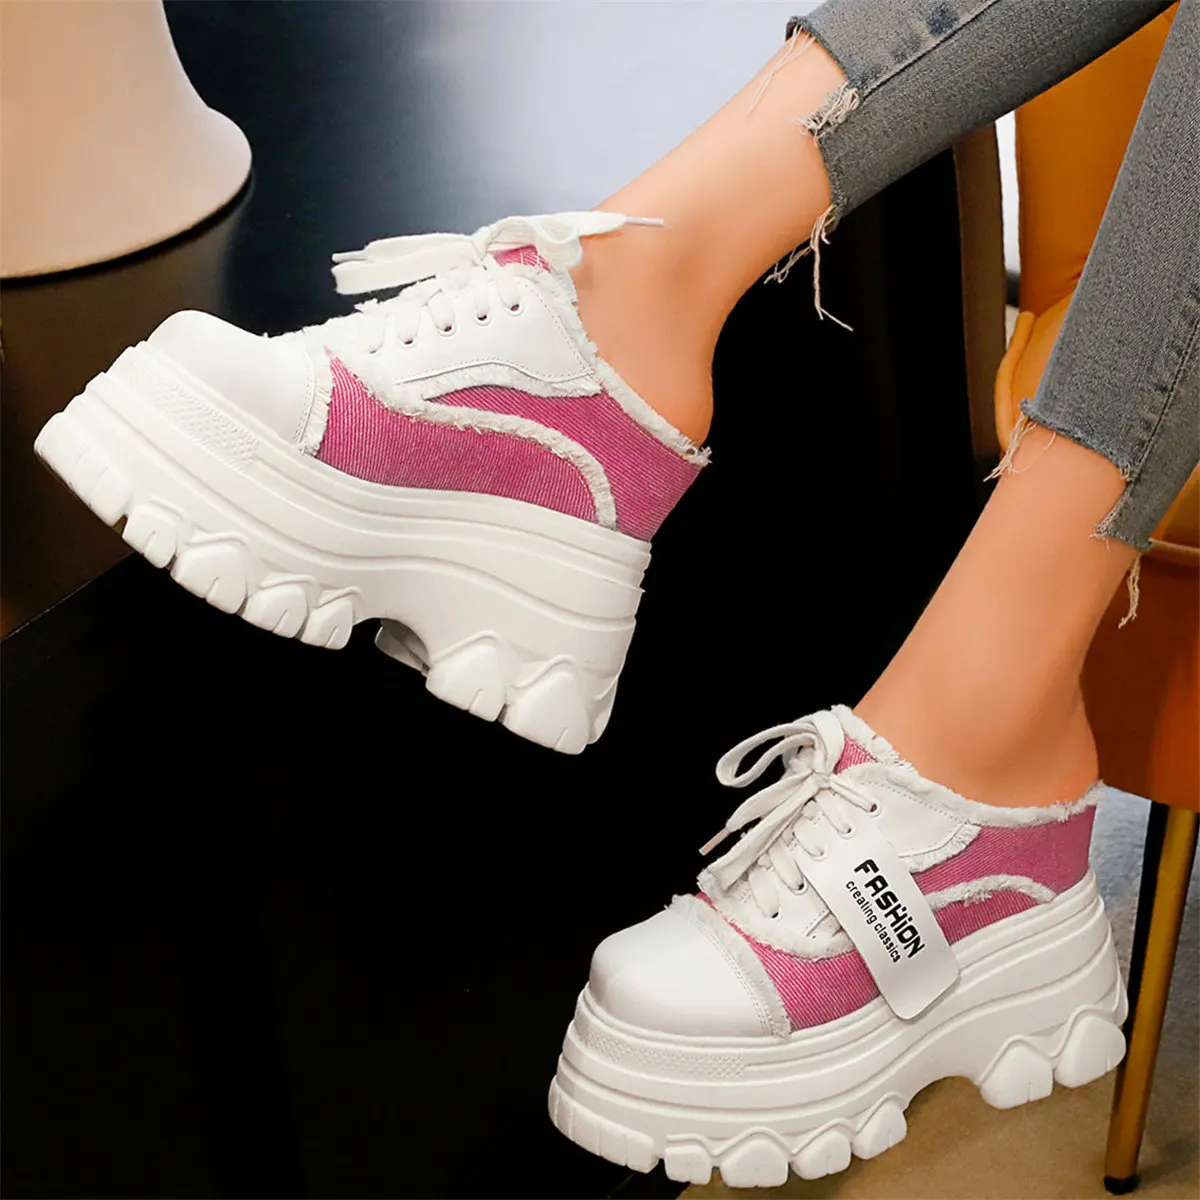 

12cm Super High Heels Slippers Women Canvas Wedges Roman Gladiator Sandals Female Round Toe Chunky Platform Pumps Casual Shoes